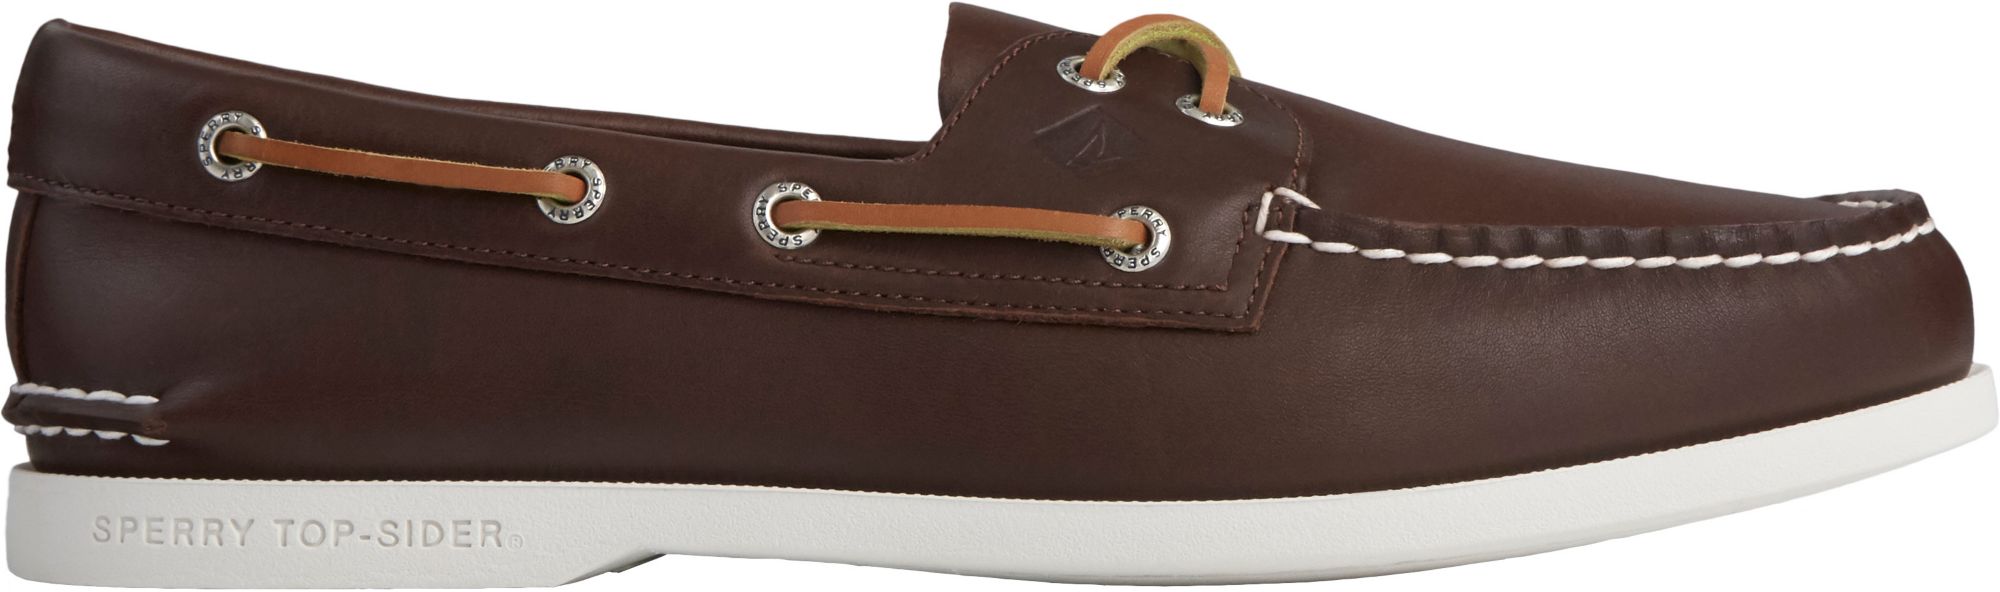 sperry topsiders near me